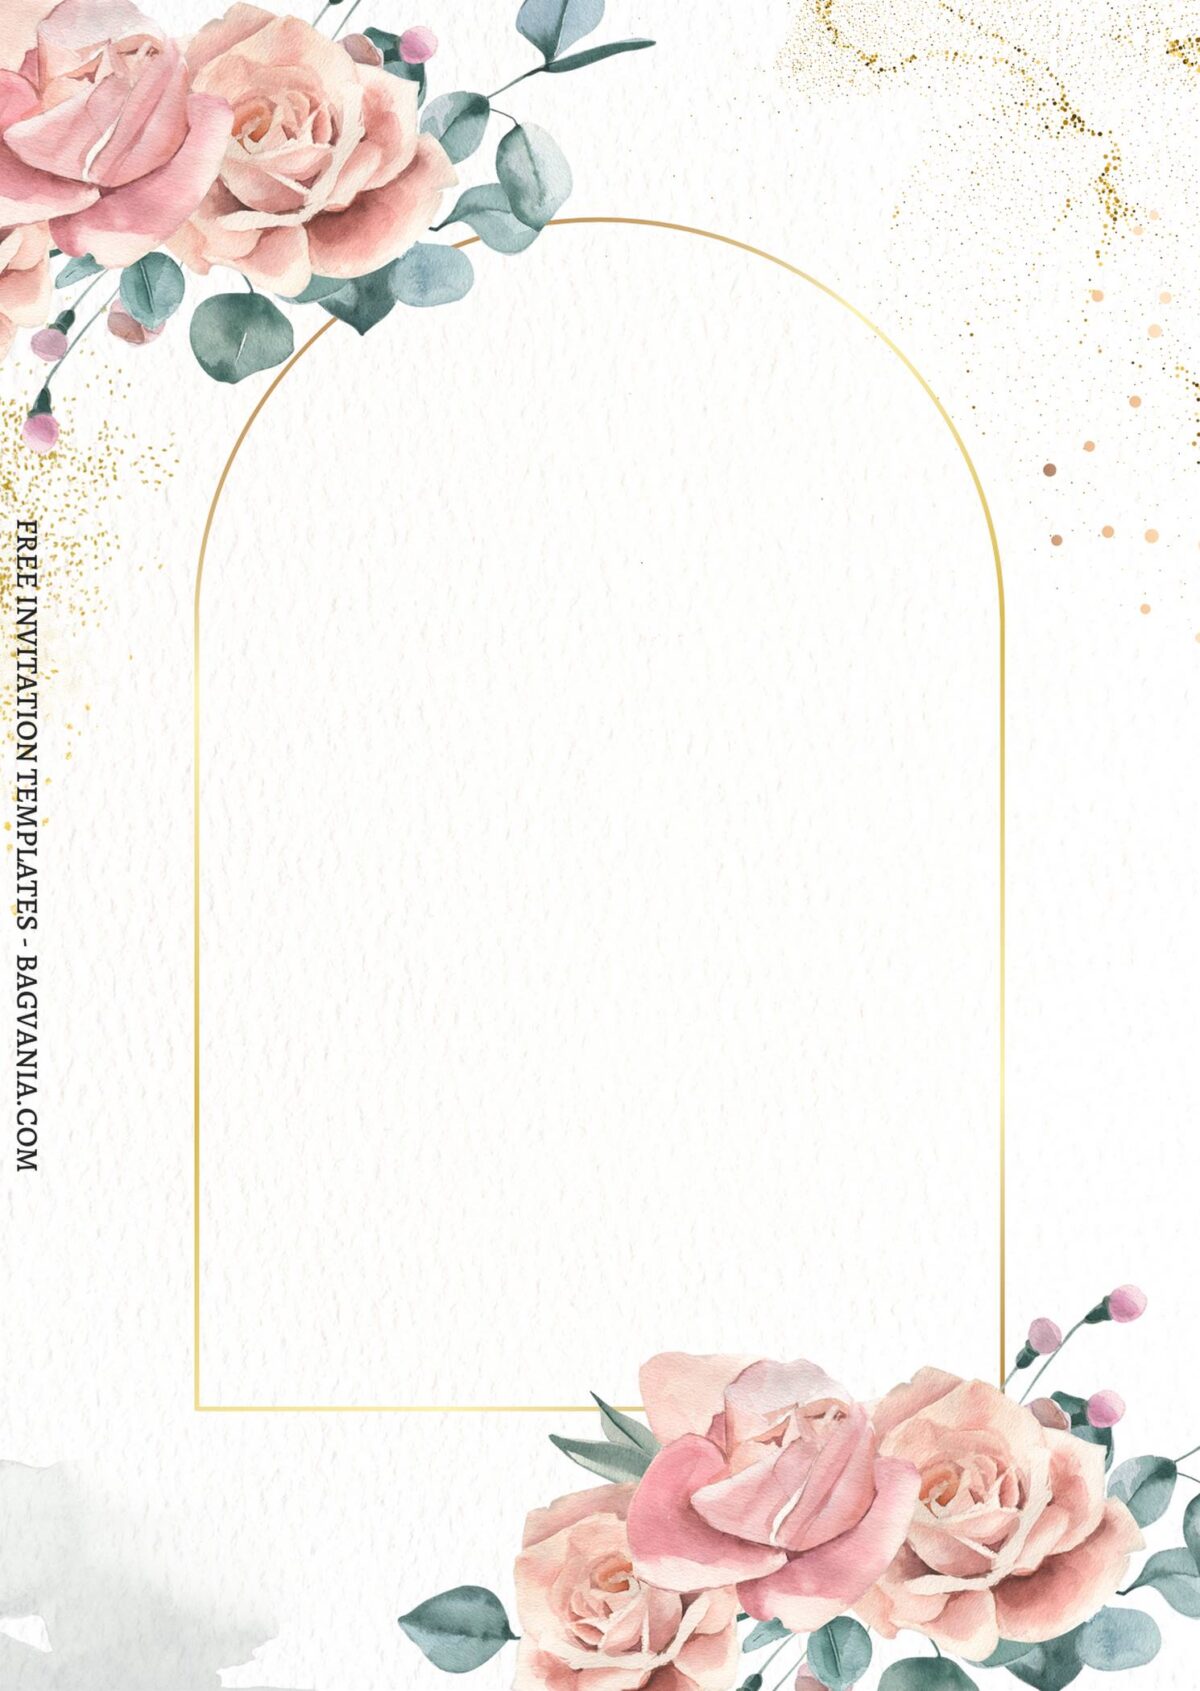 (Free) 7+ Cozy Autumn Floral Canva Birthday Invitation Templates with watercolor eucalyptus